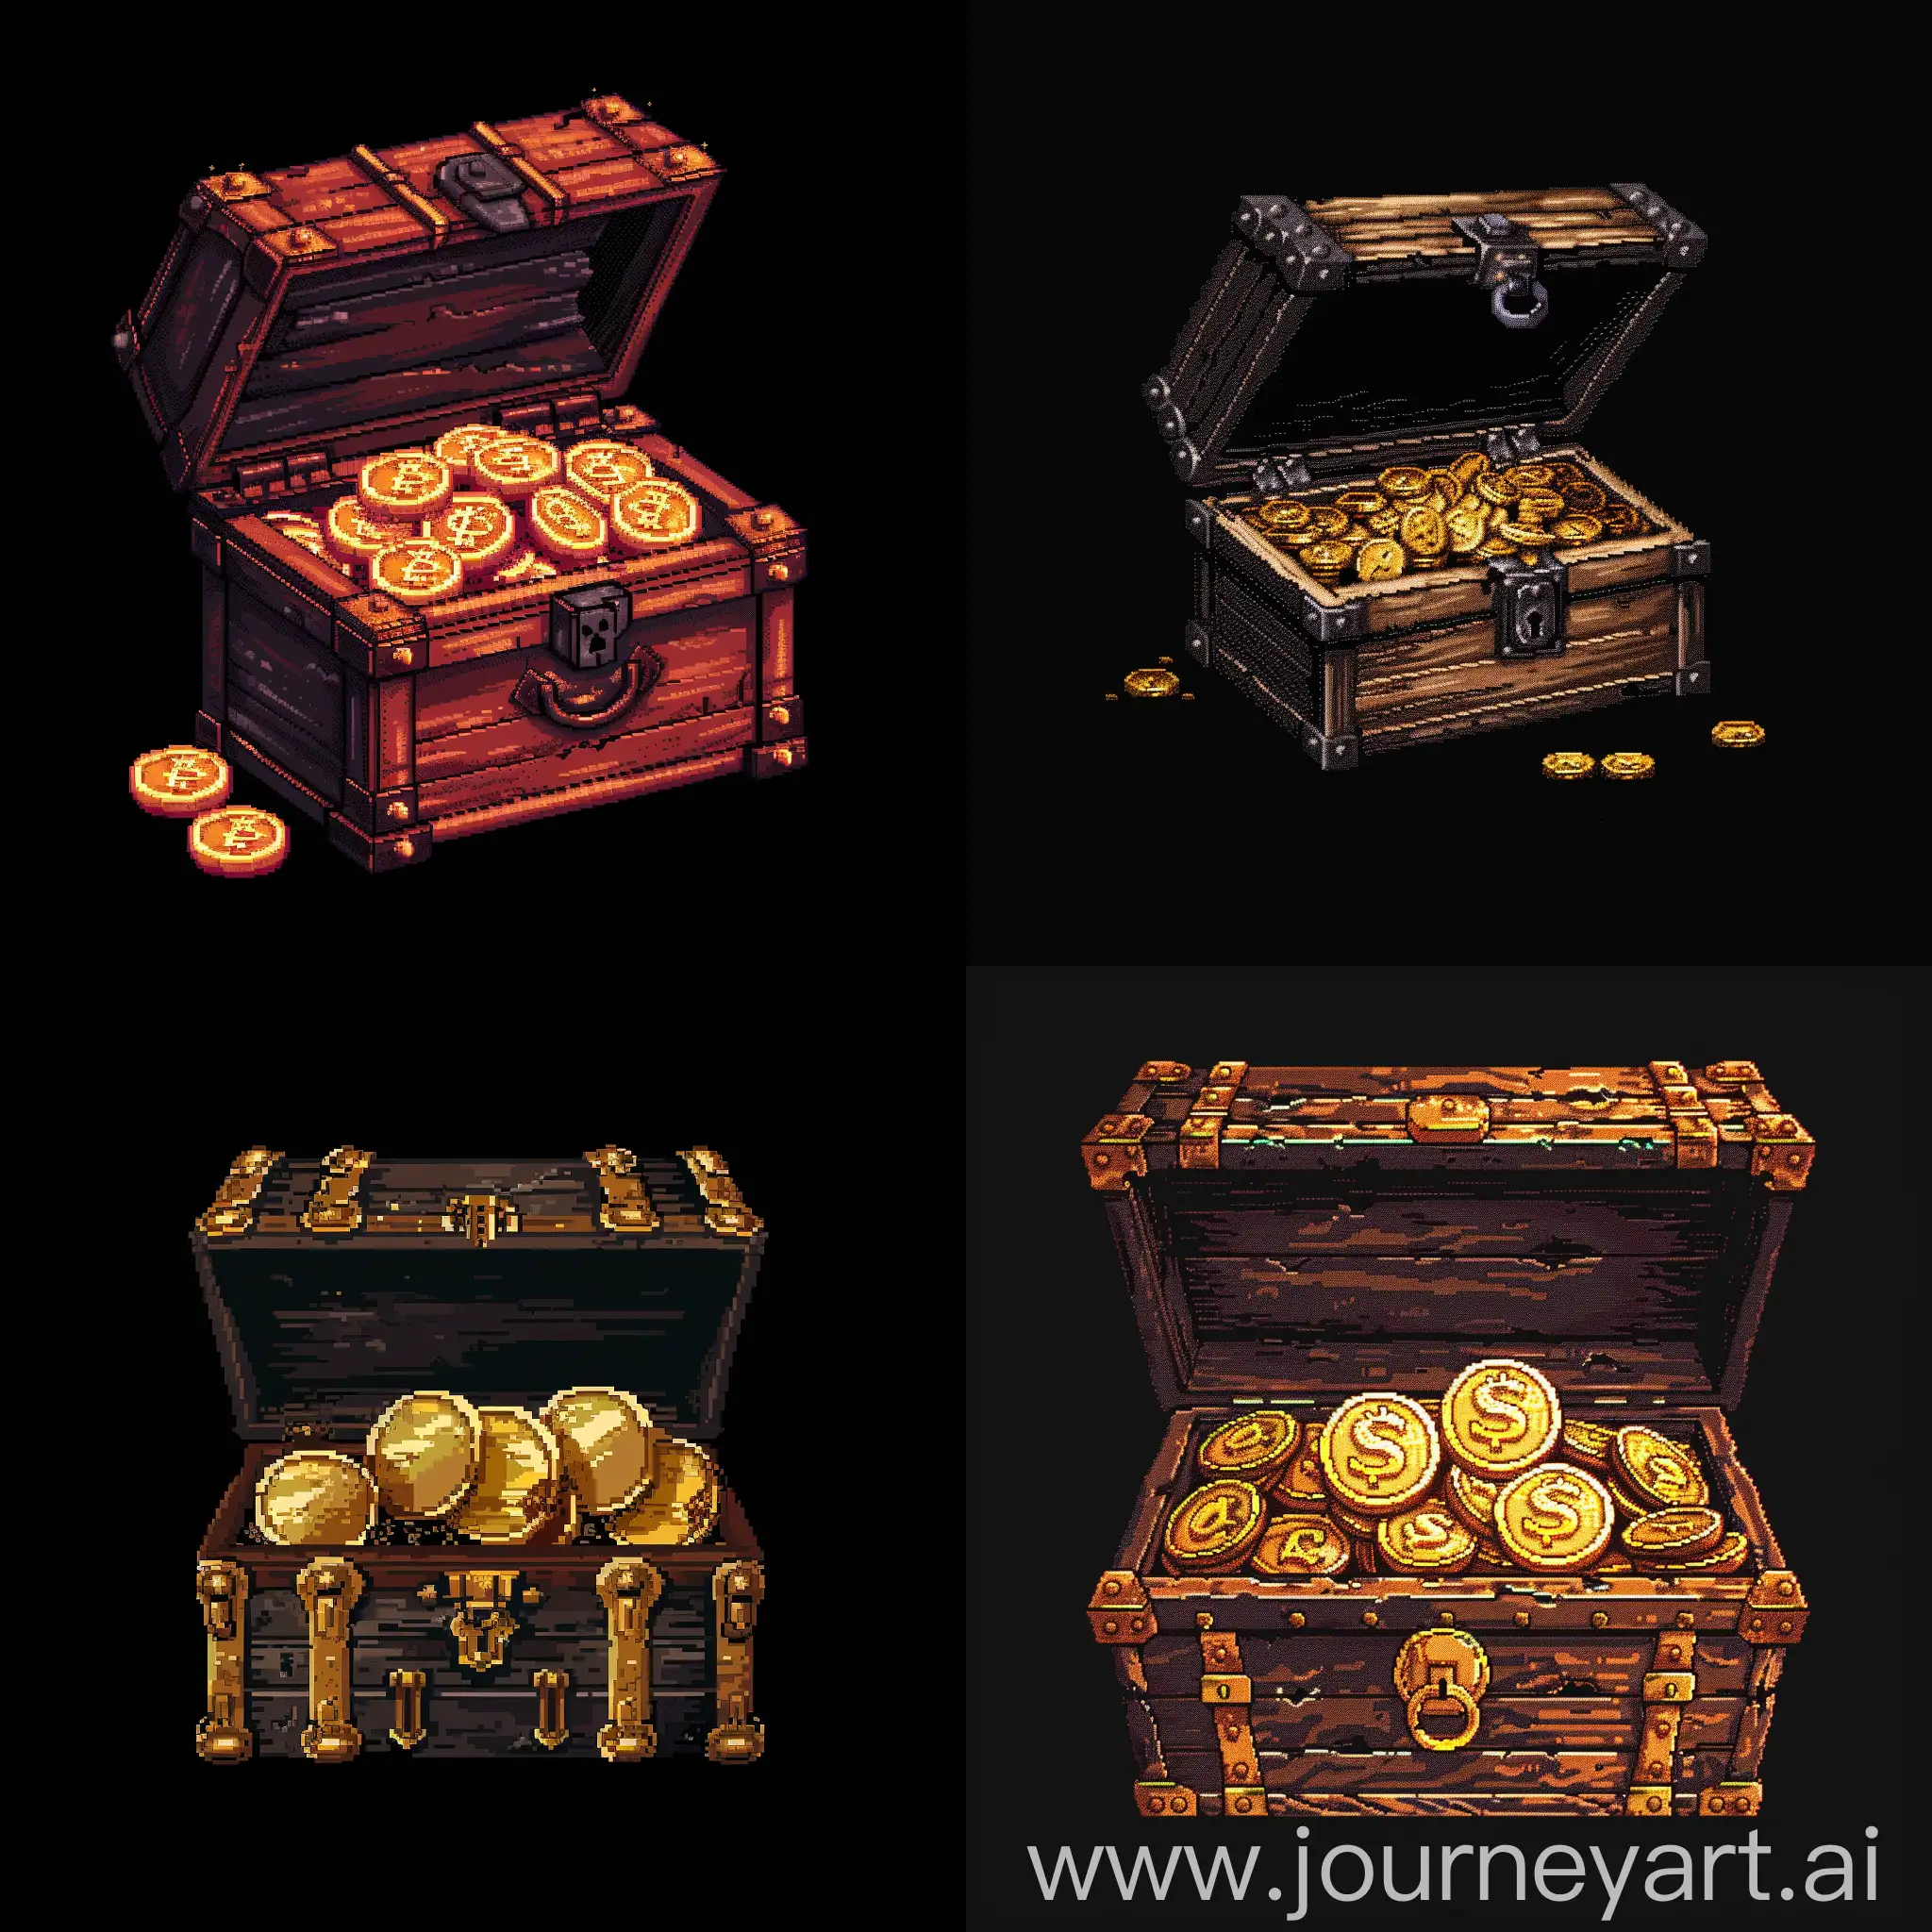 an open chest containing 5 gold coins
 pixel art, background all black, horror style